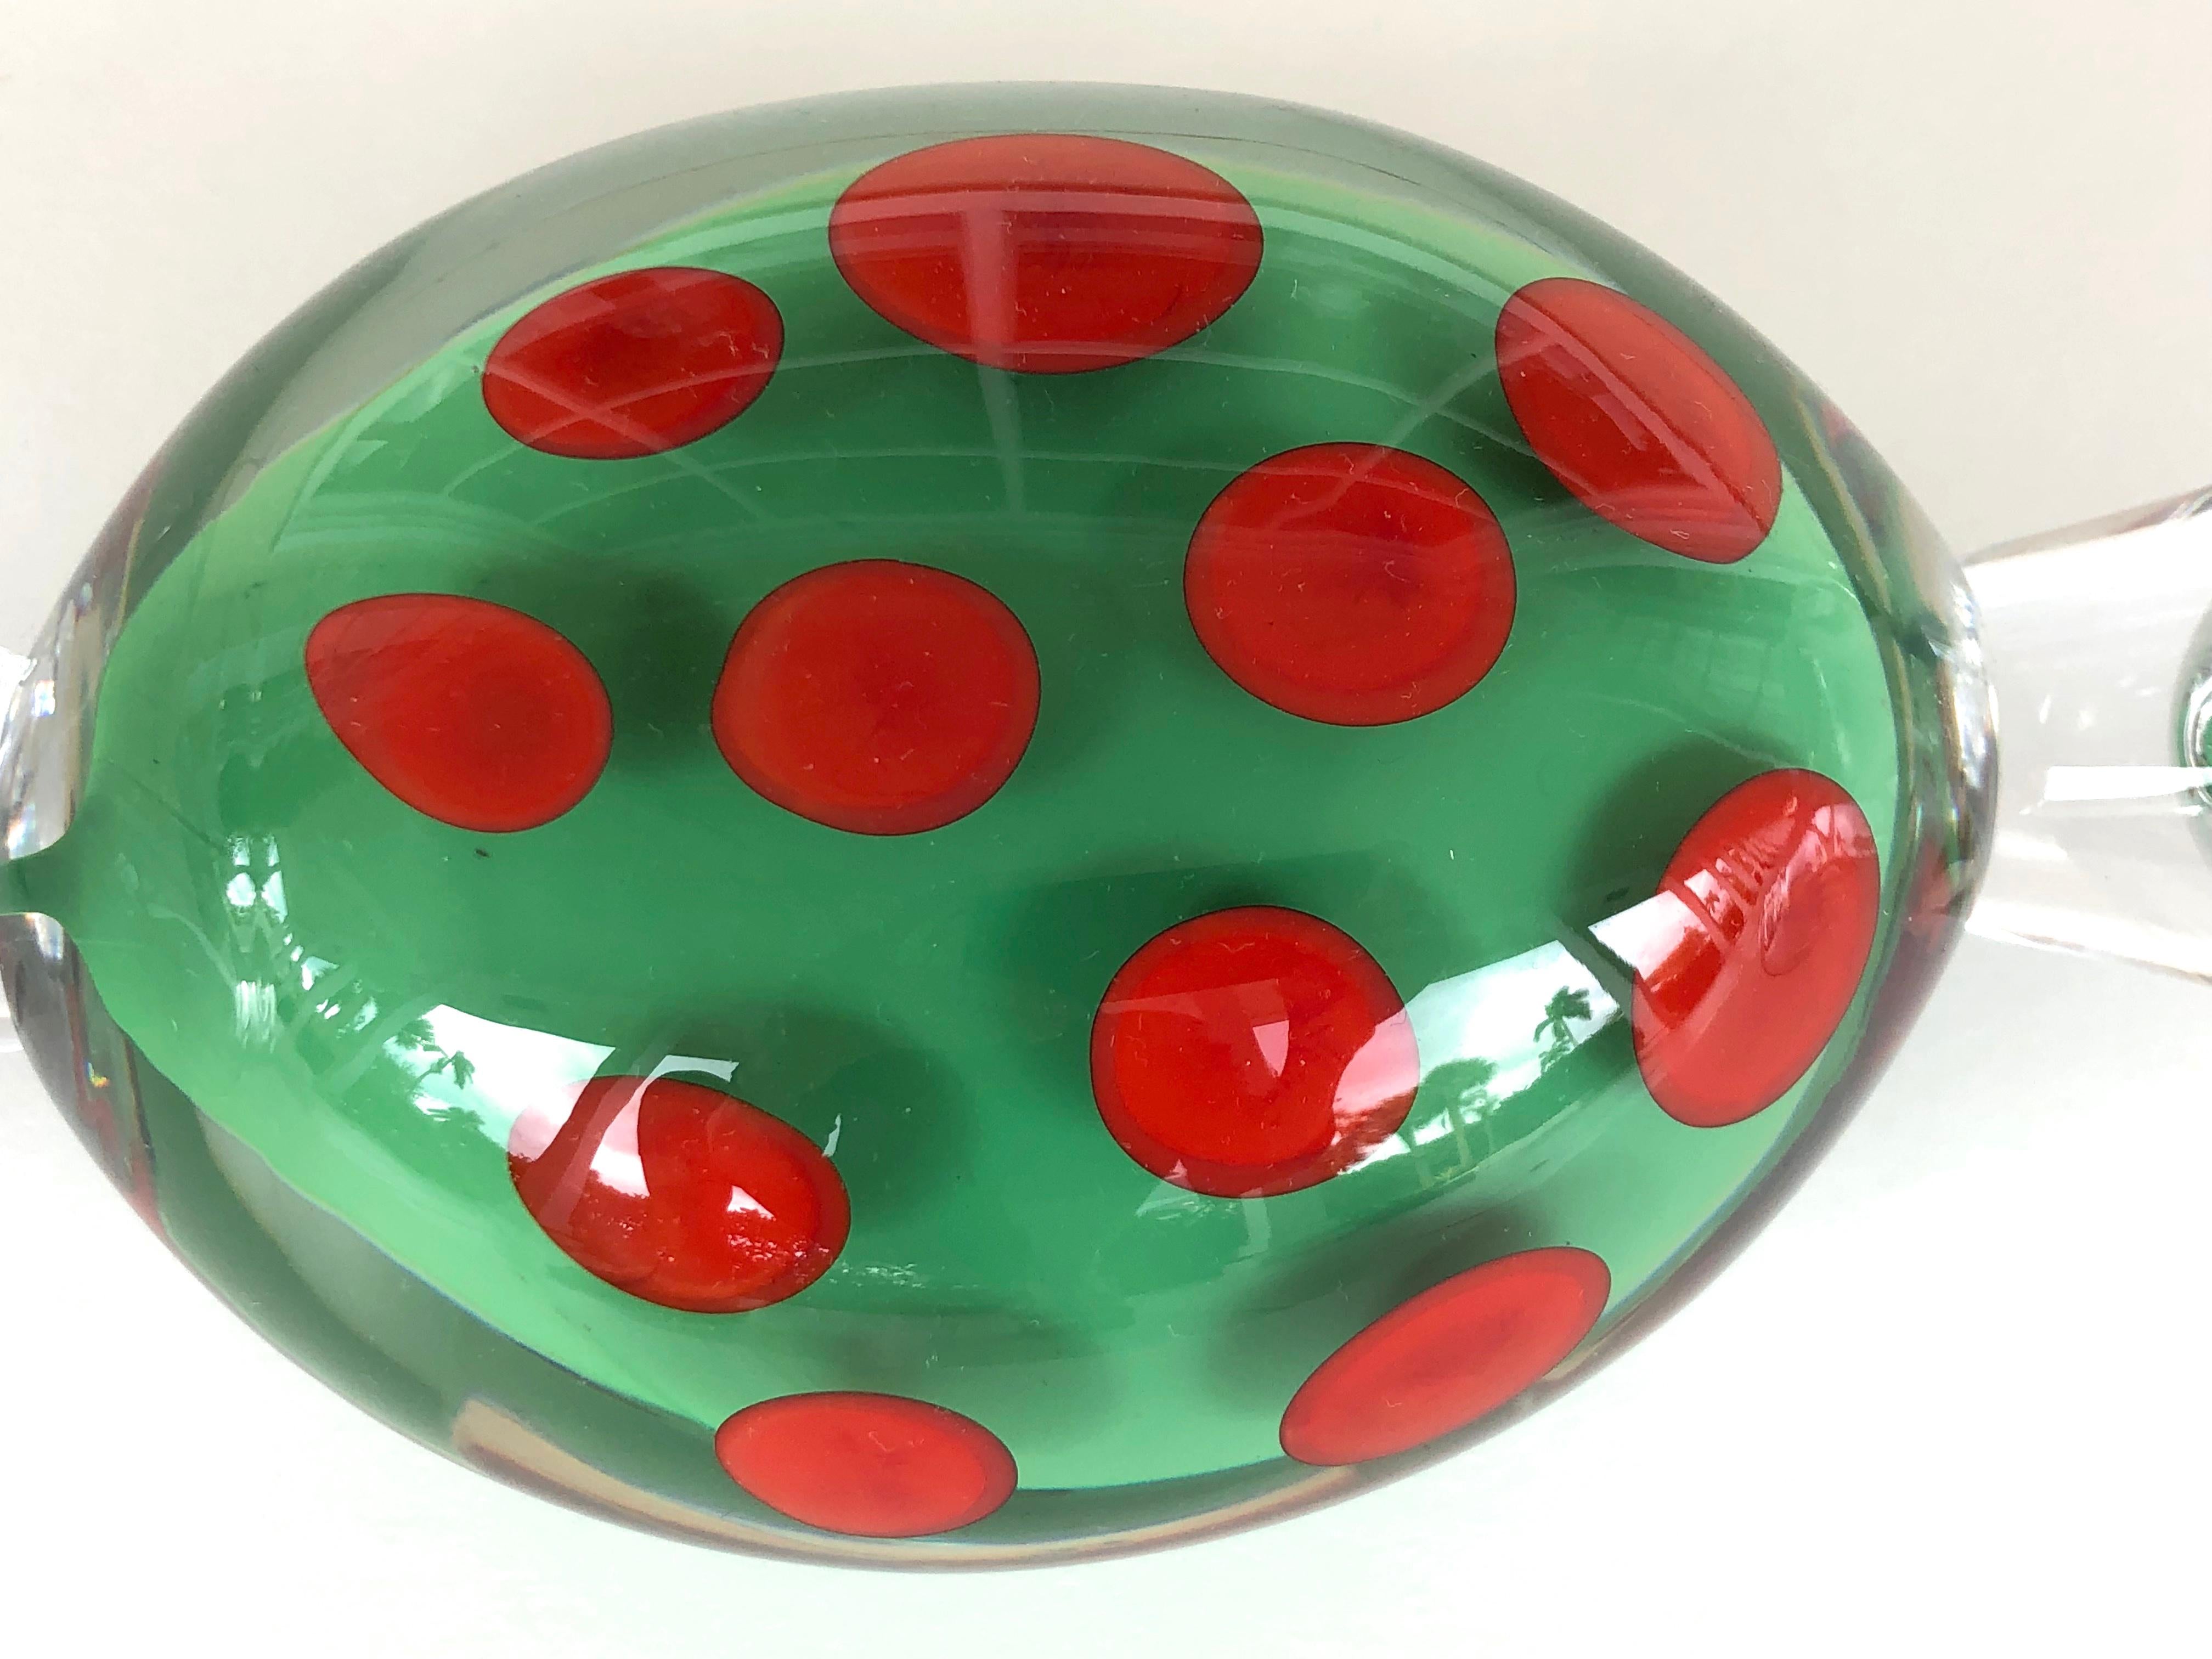 Art Glass Candy With Red Dots - Modern Sculpture by Studio Ahus